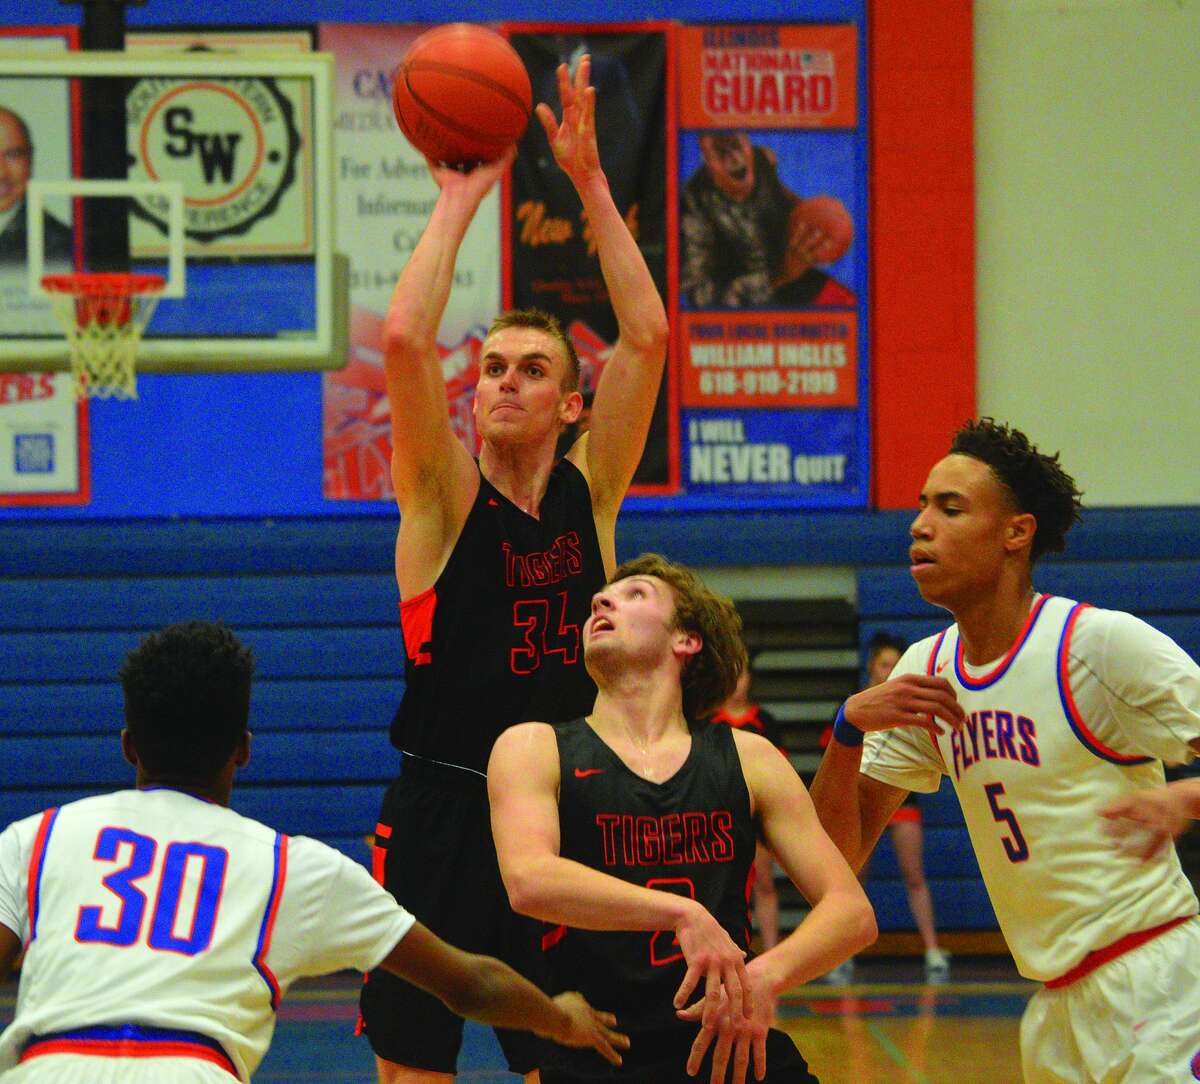 Edwardsville senior forward Caleb Strohmeier (No. 34) puts up a shot over teammate Jack Marinko and two East St. Louis defenders during Wednesday’s Southwestern Conference game in East St. Louis.